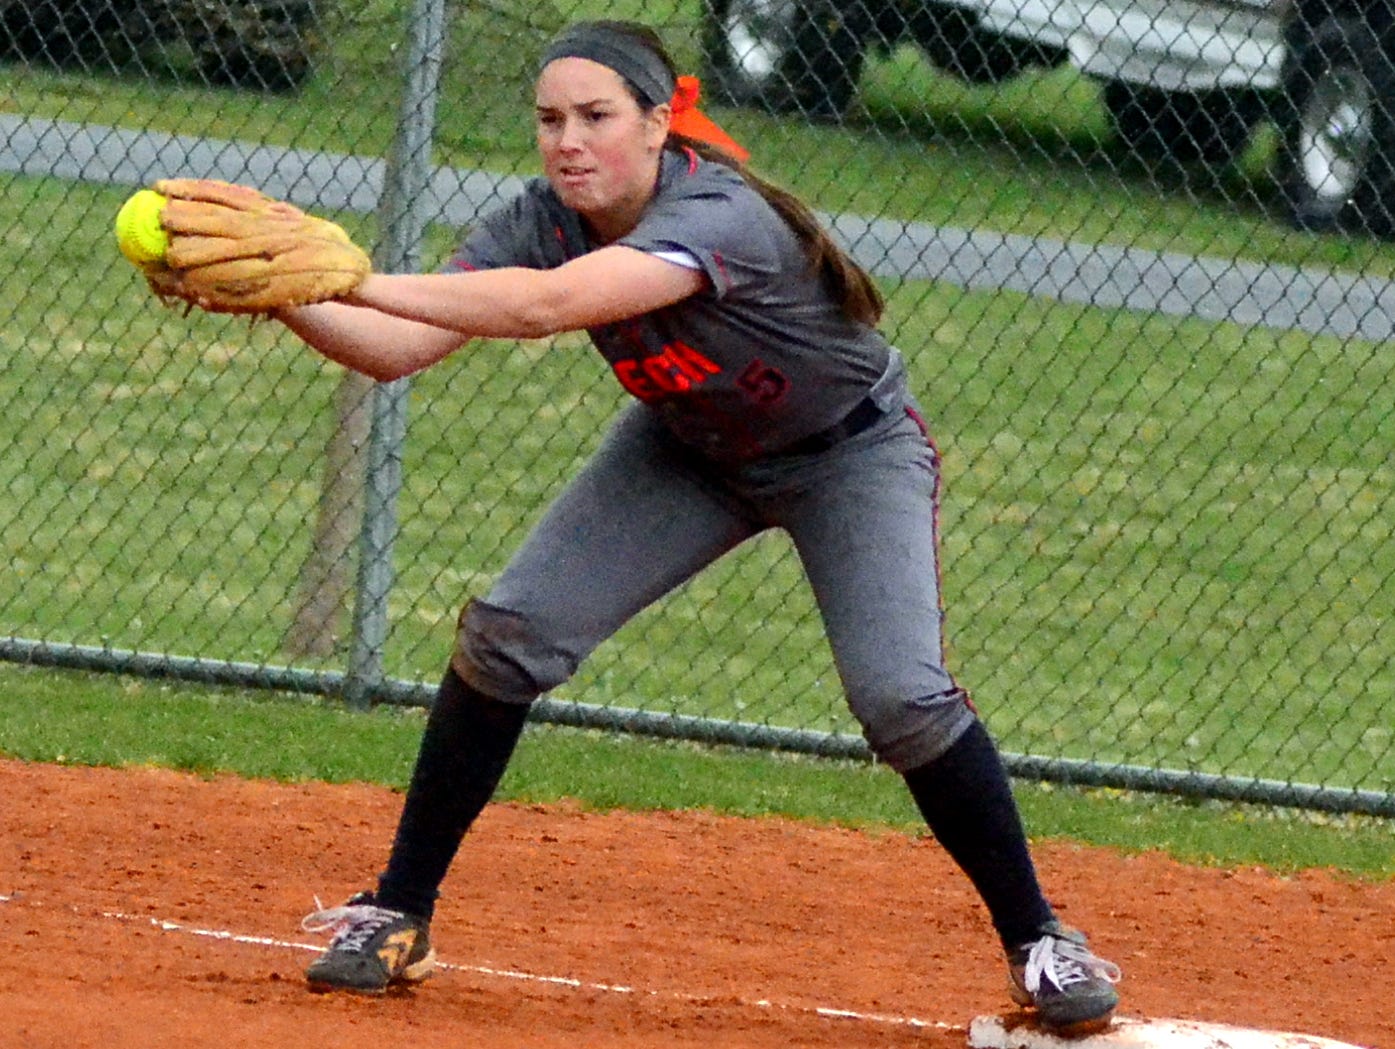 Beech High sophomore Kaylor Chaffin hangs on to a second-inning throw at first base. Chaffin scored three runs in the Lady Buccaneers’ 22-11 victory over Station Camp.